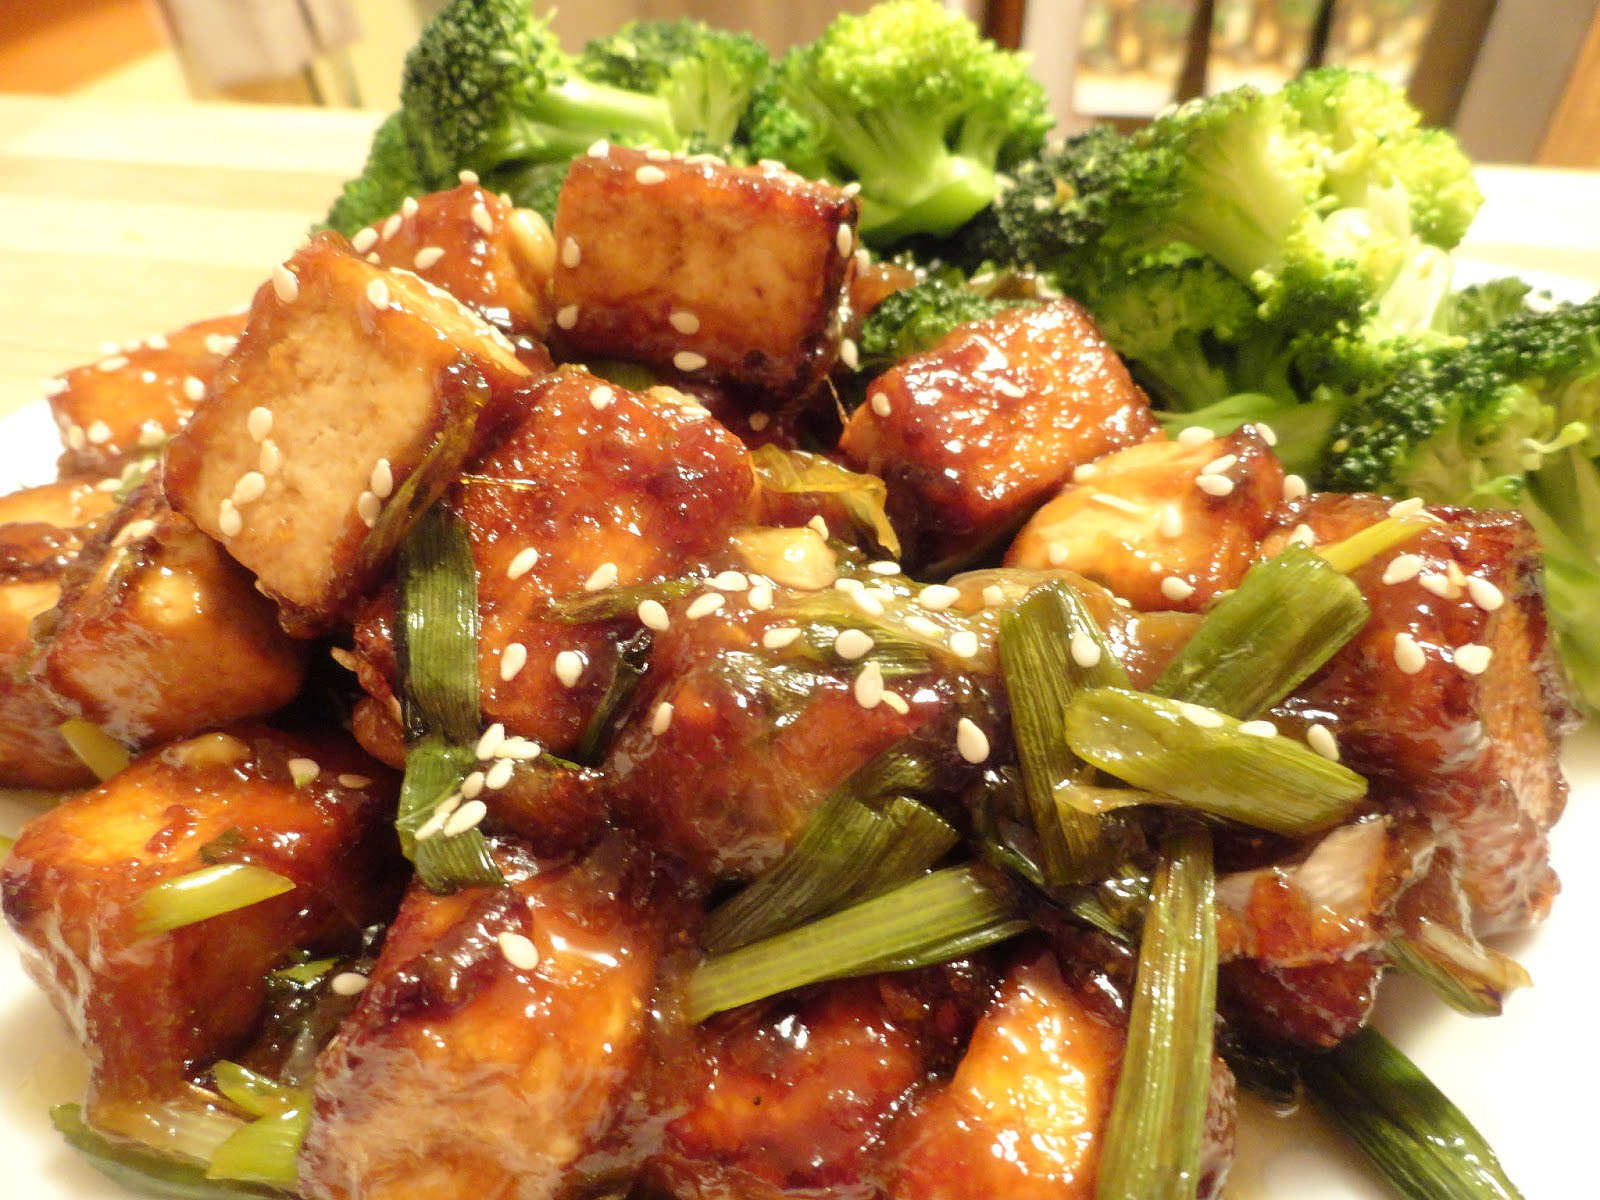 Vegan General Tso’s Tofu with Steamed Broccoli and 5-Spice Brown Rice